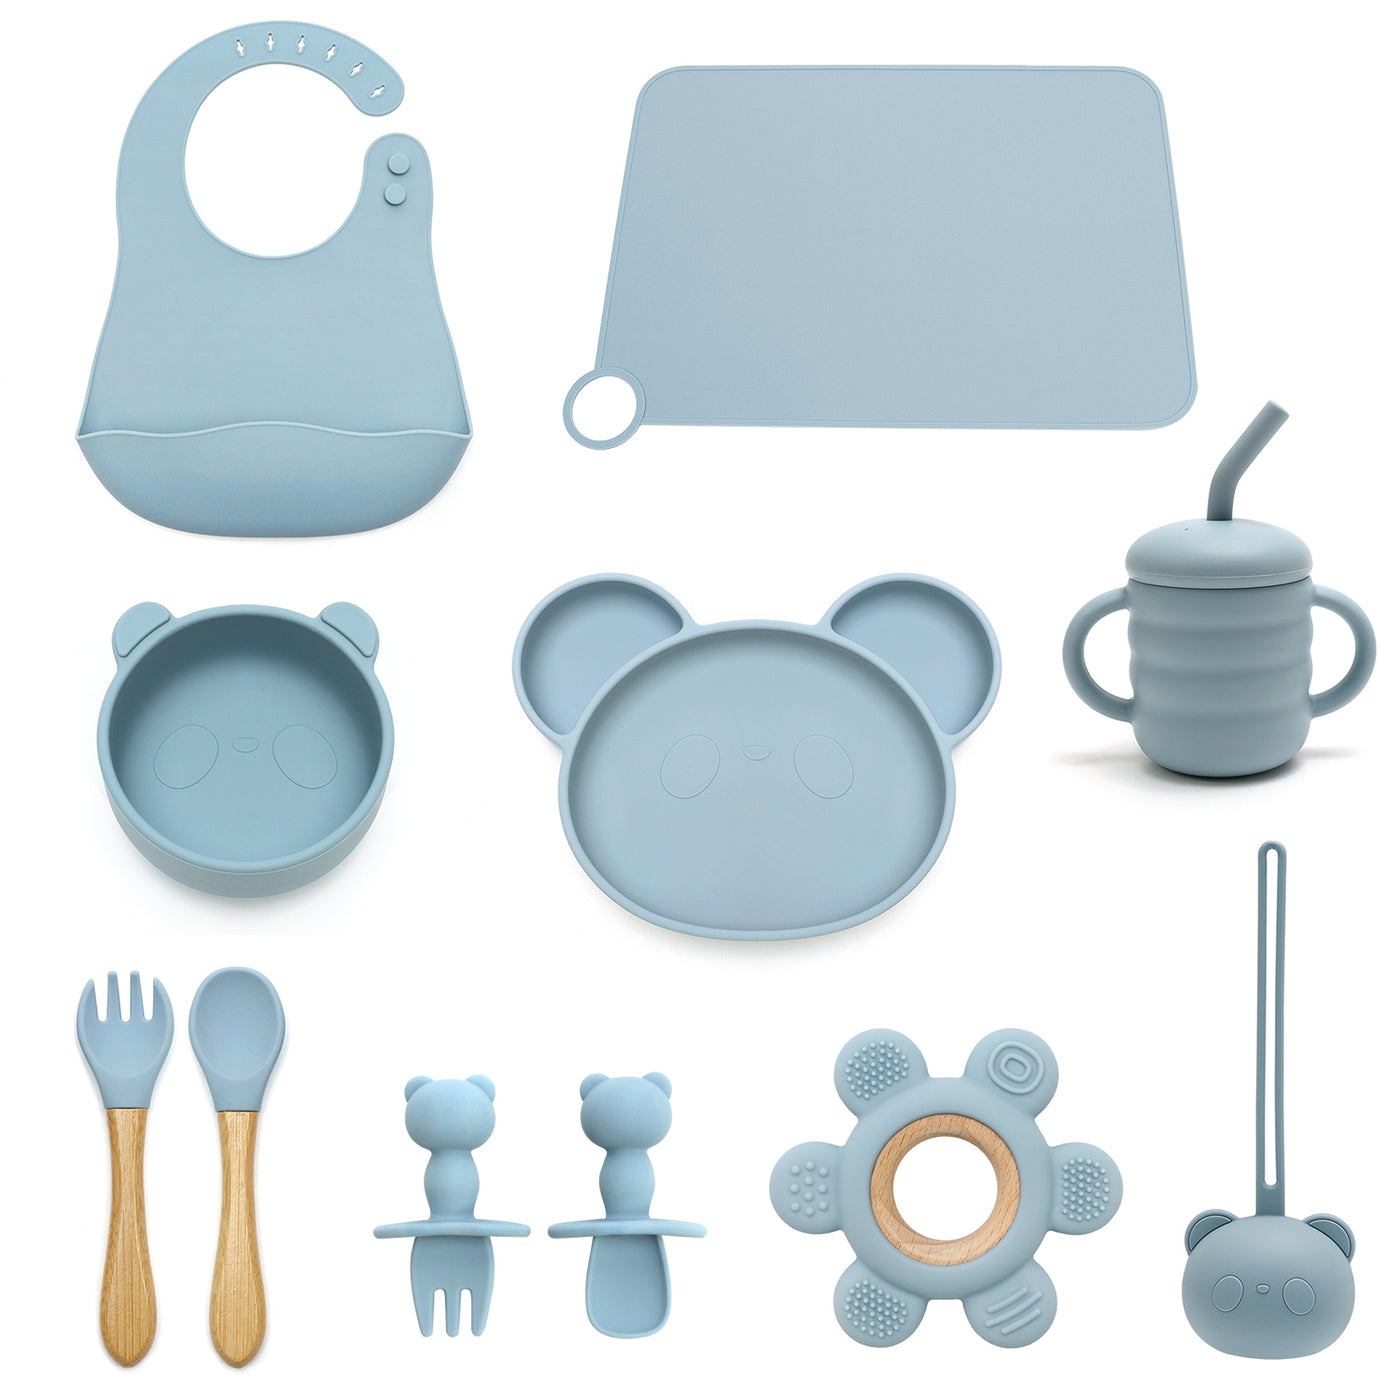 BLUE 11 PIECE SILICONE BABY AND TODDLER NON-SLIP SUCTION CUP FEEDING SET